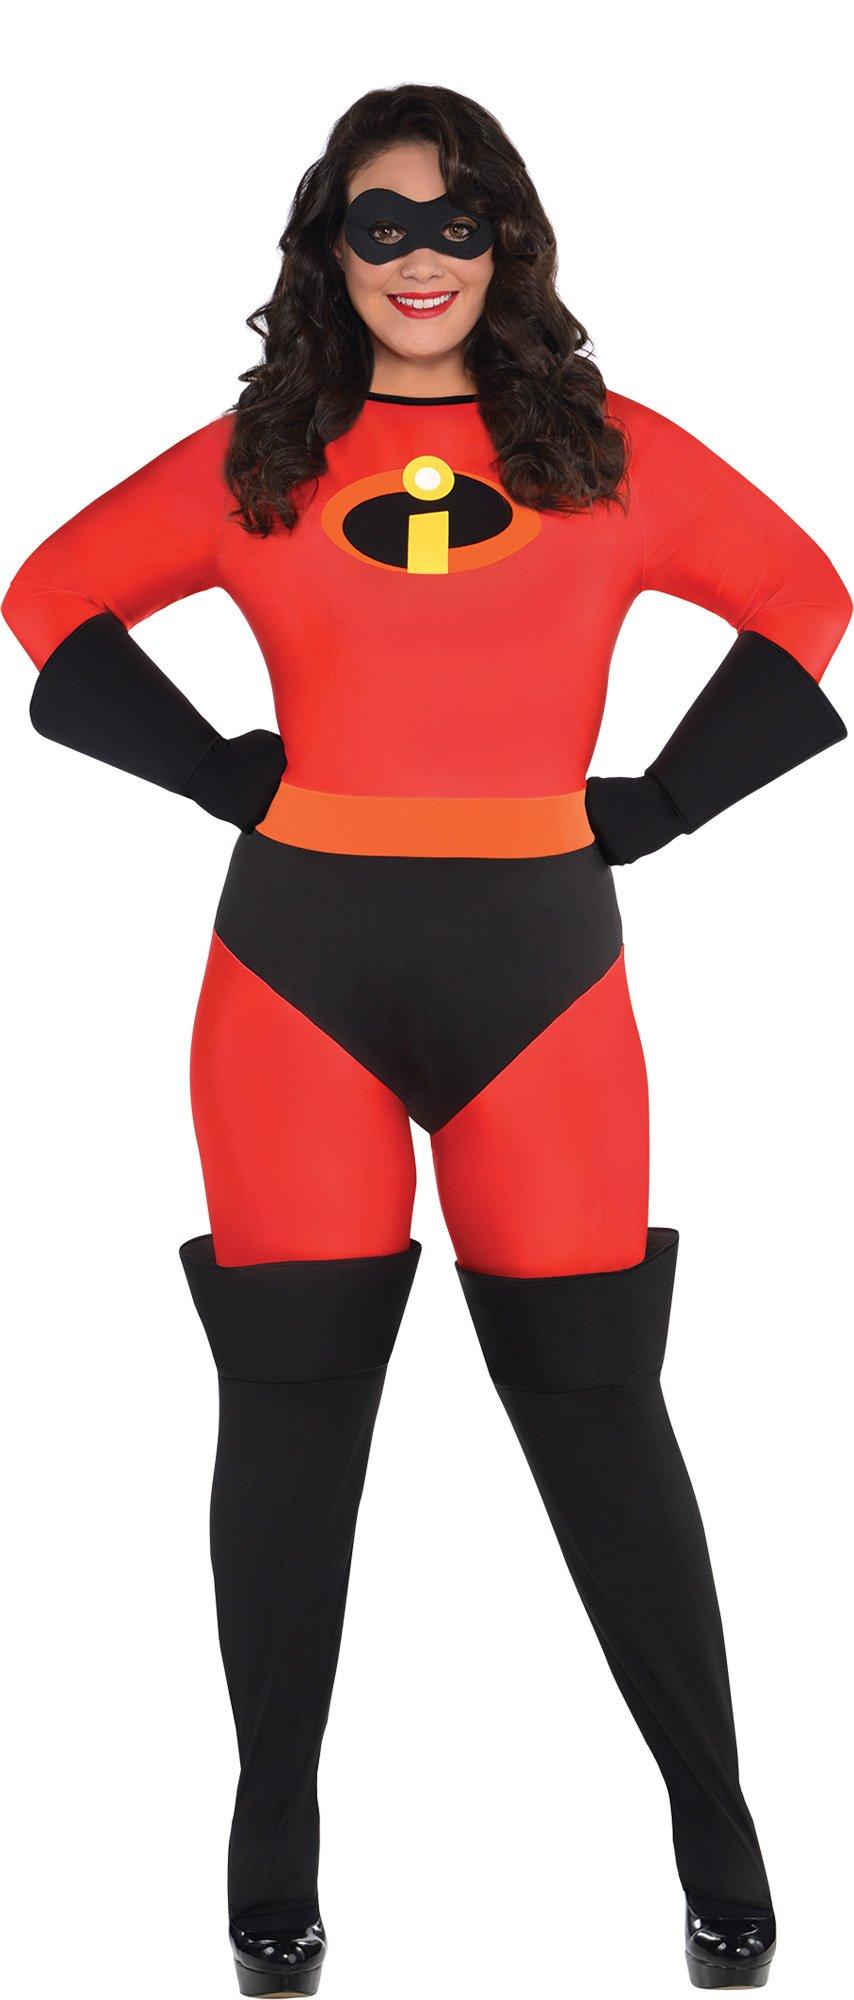 Mr. & Mrs. Incredible Couples Costumes - The Incredibles